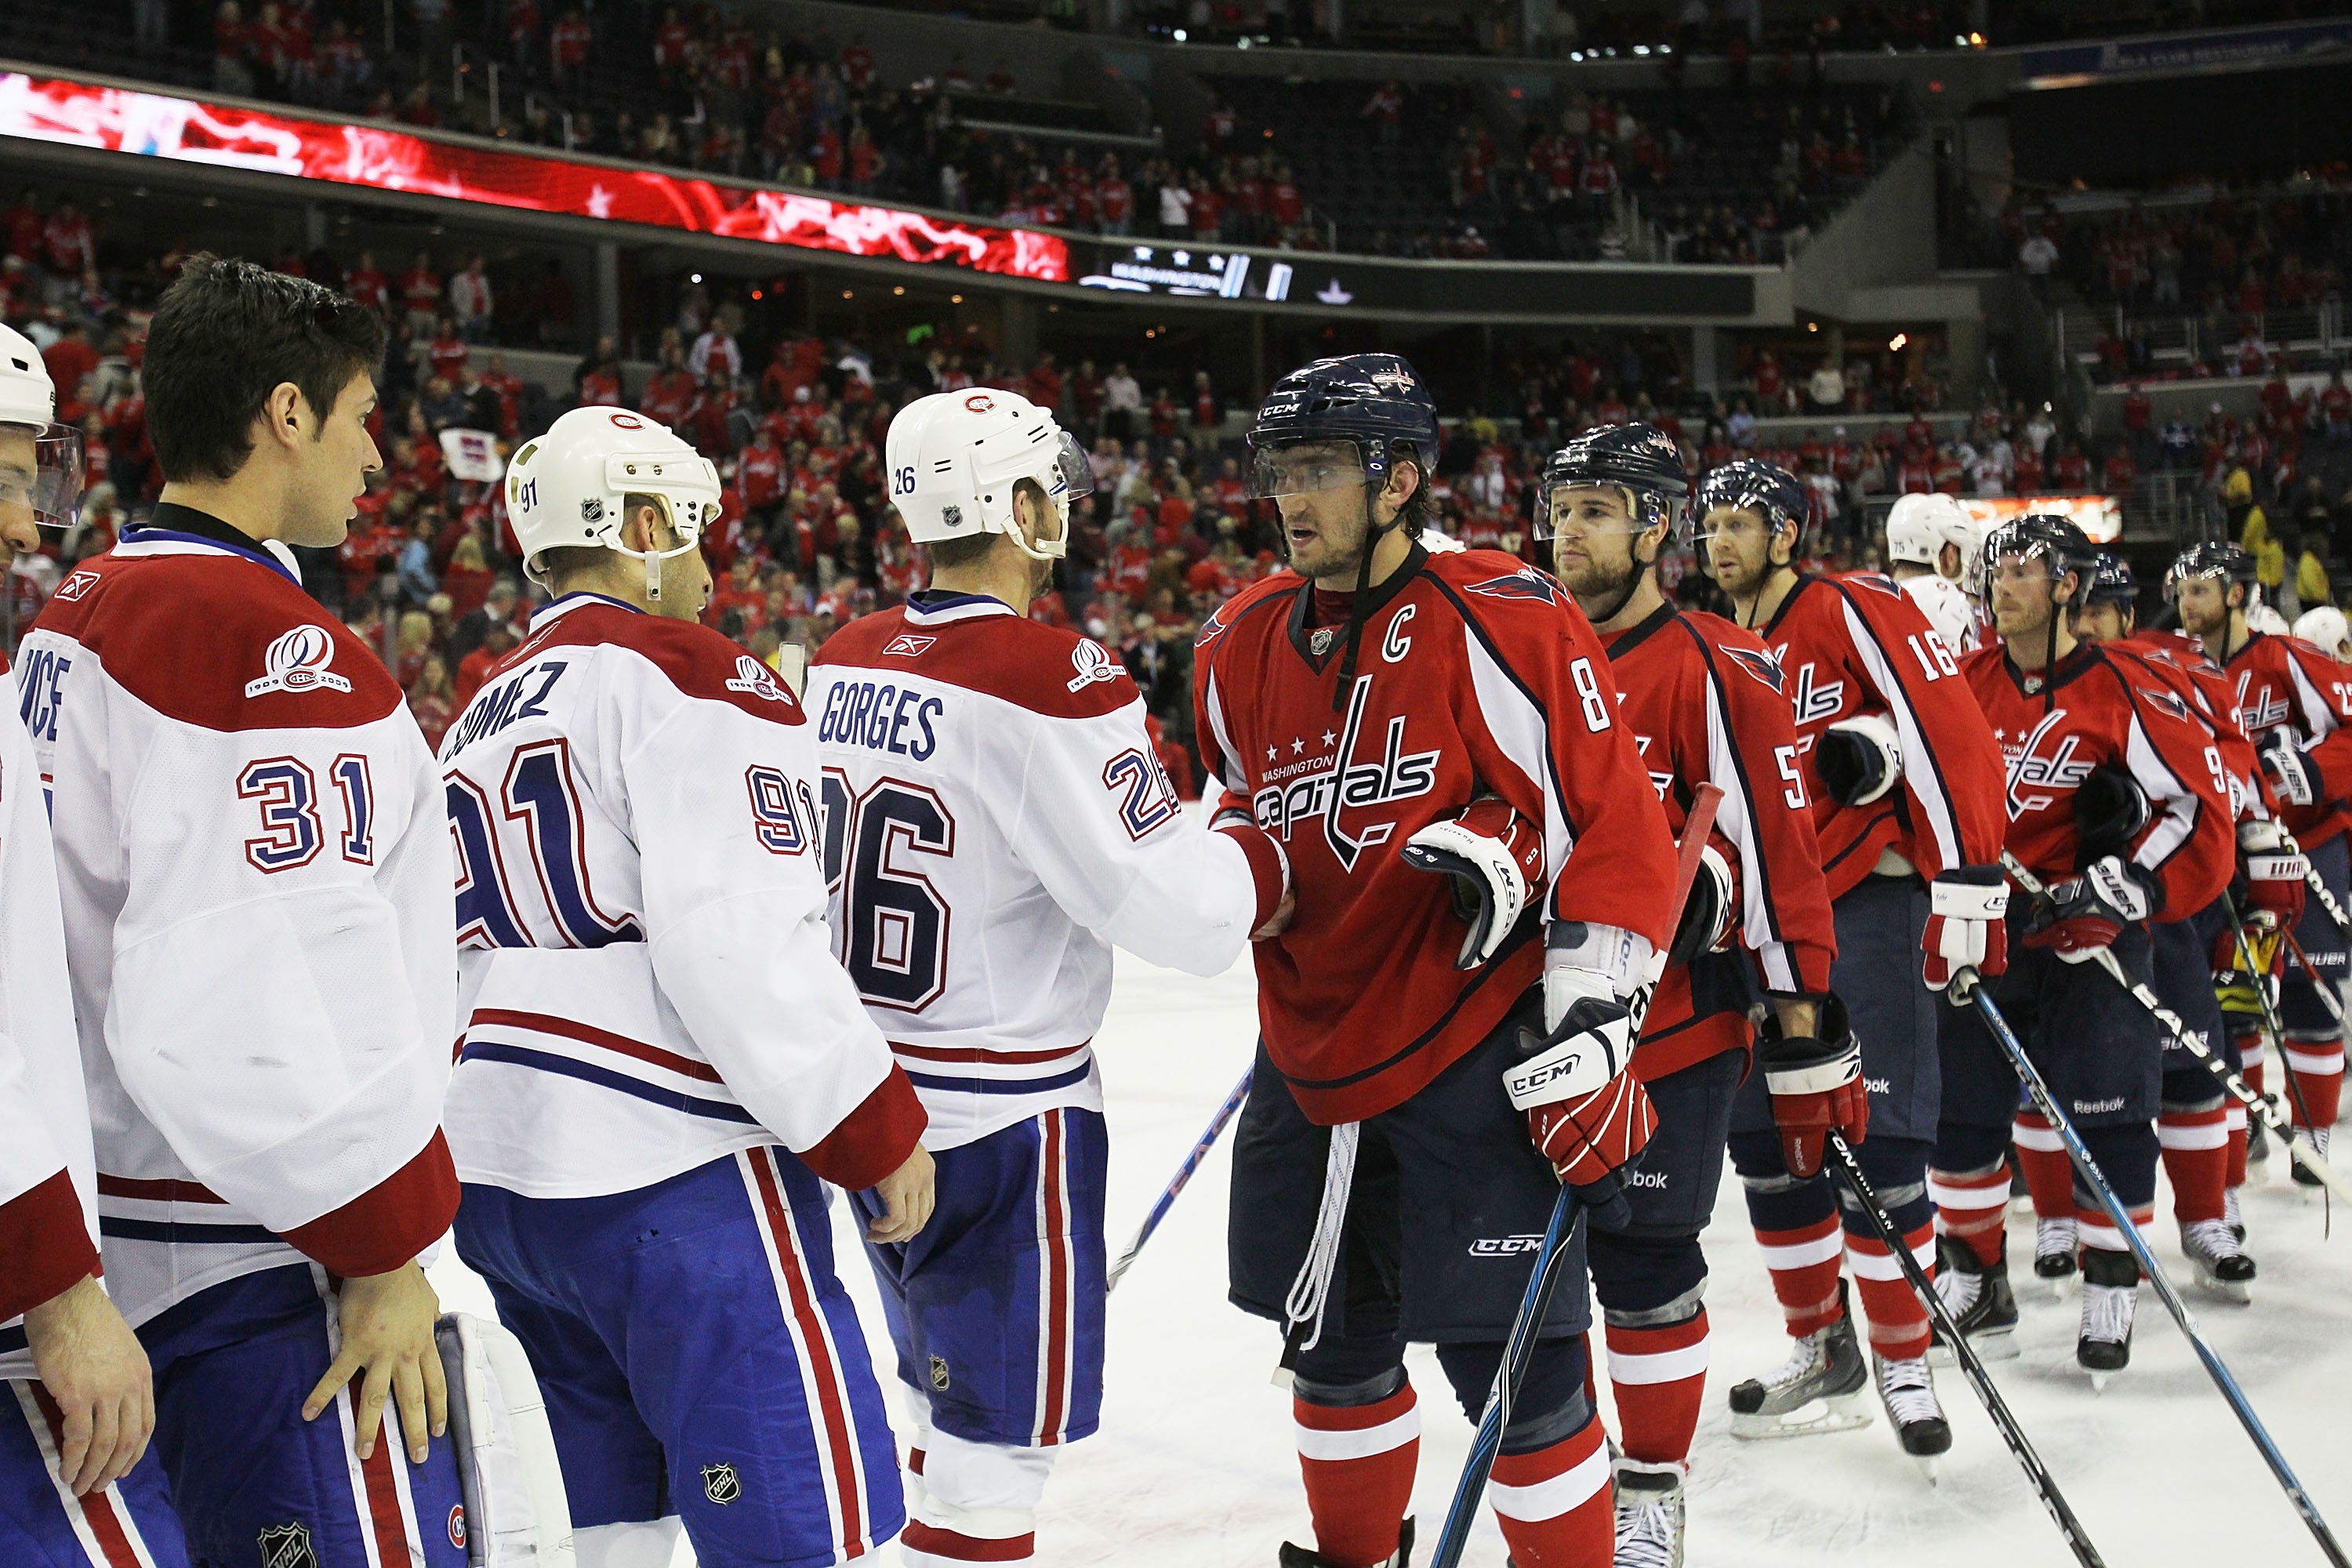 Reasons to Check Out a Washington Capitals Game